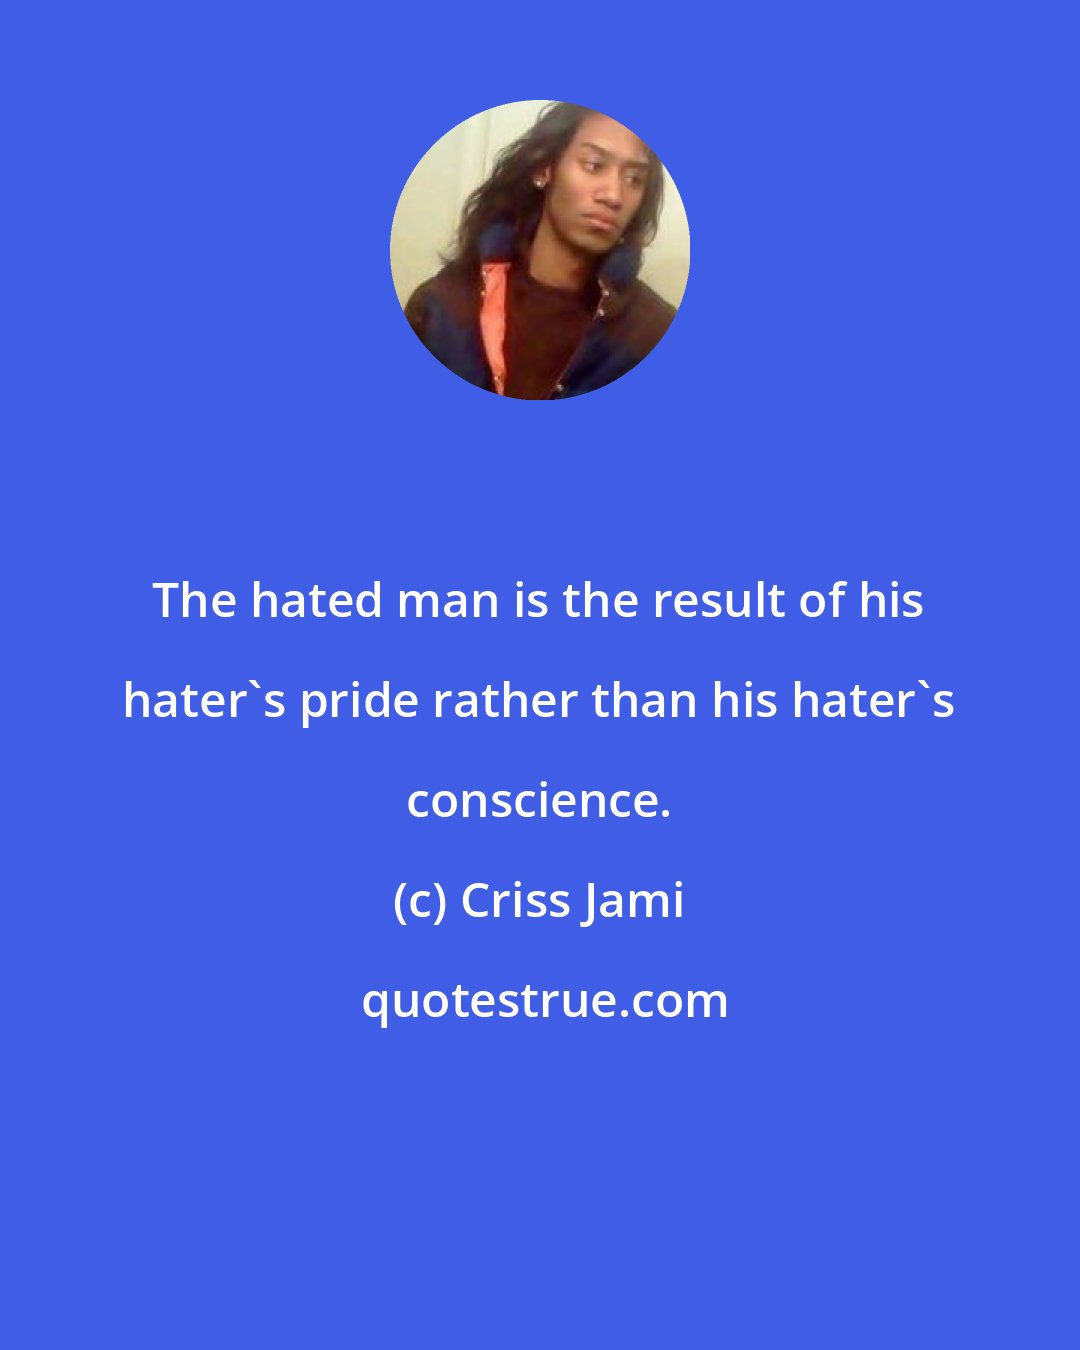 Criss Jami: The hated man is the result of his hater's pride rather than his hater's conscience.